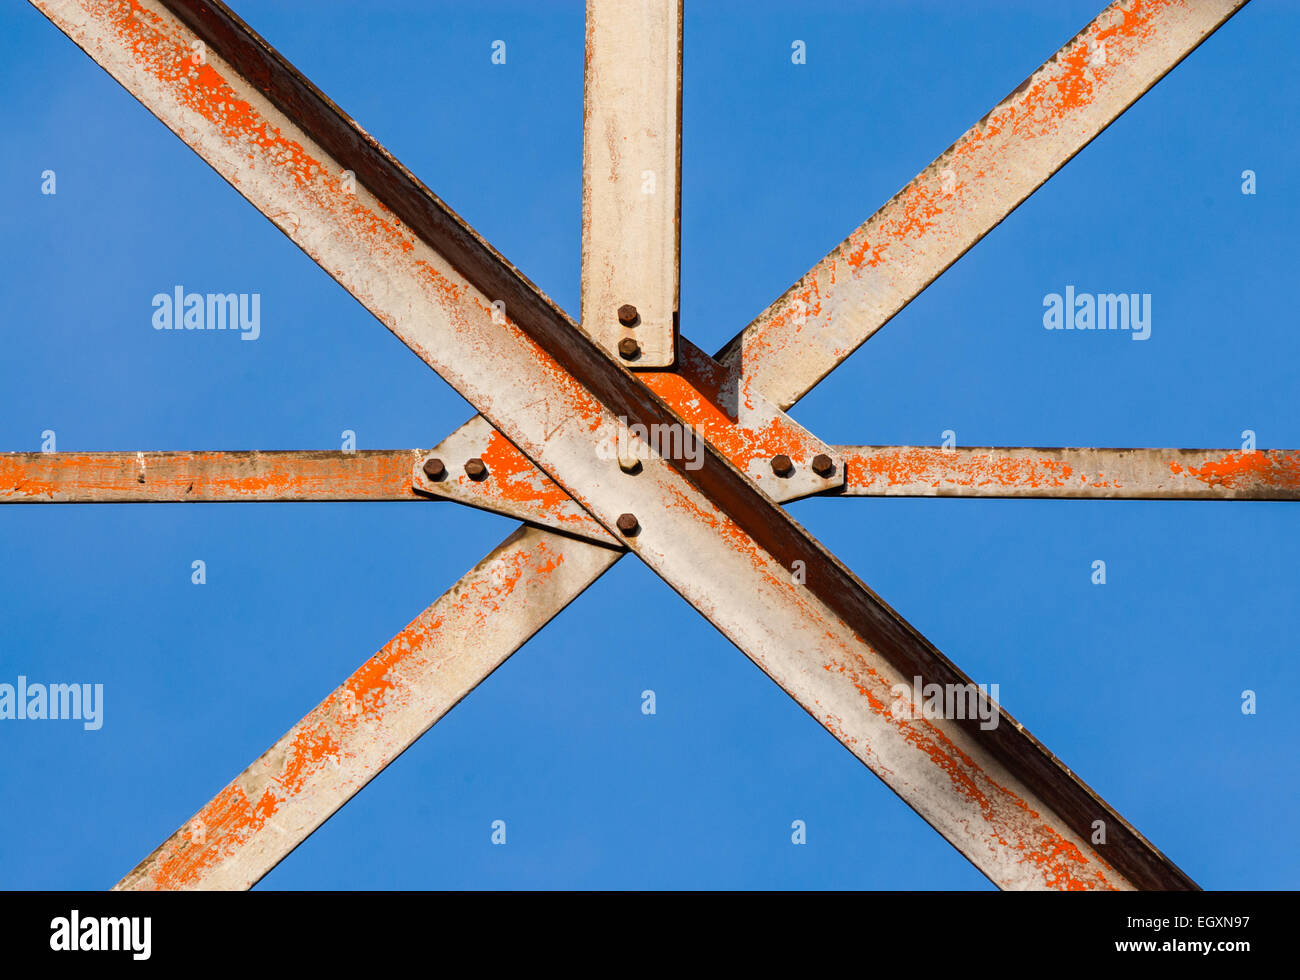 Worn metal girders crossing held together with plates and screws. Stock Photo